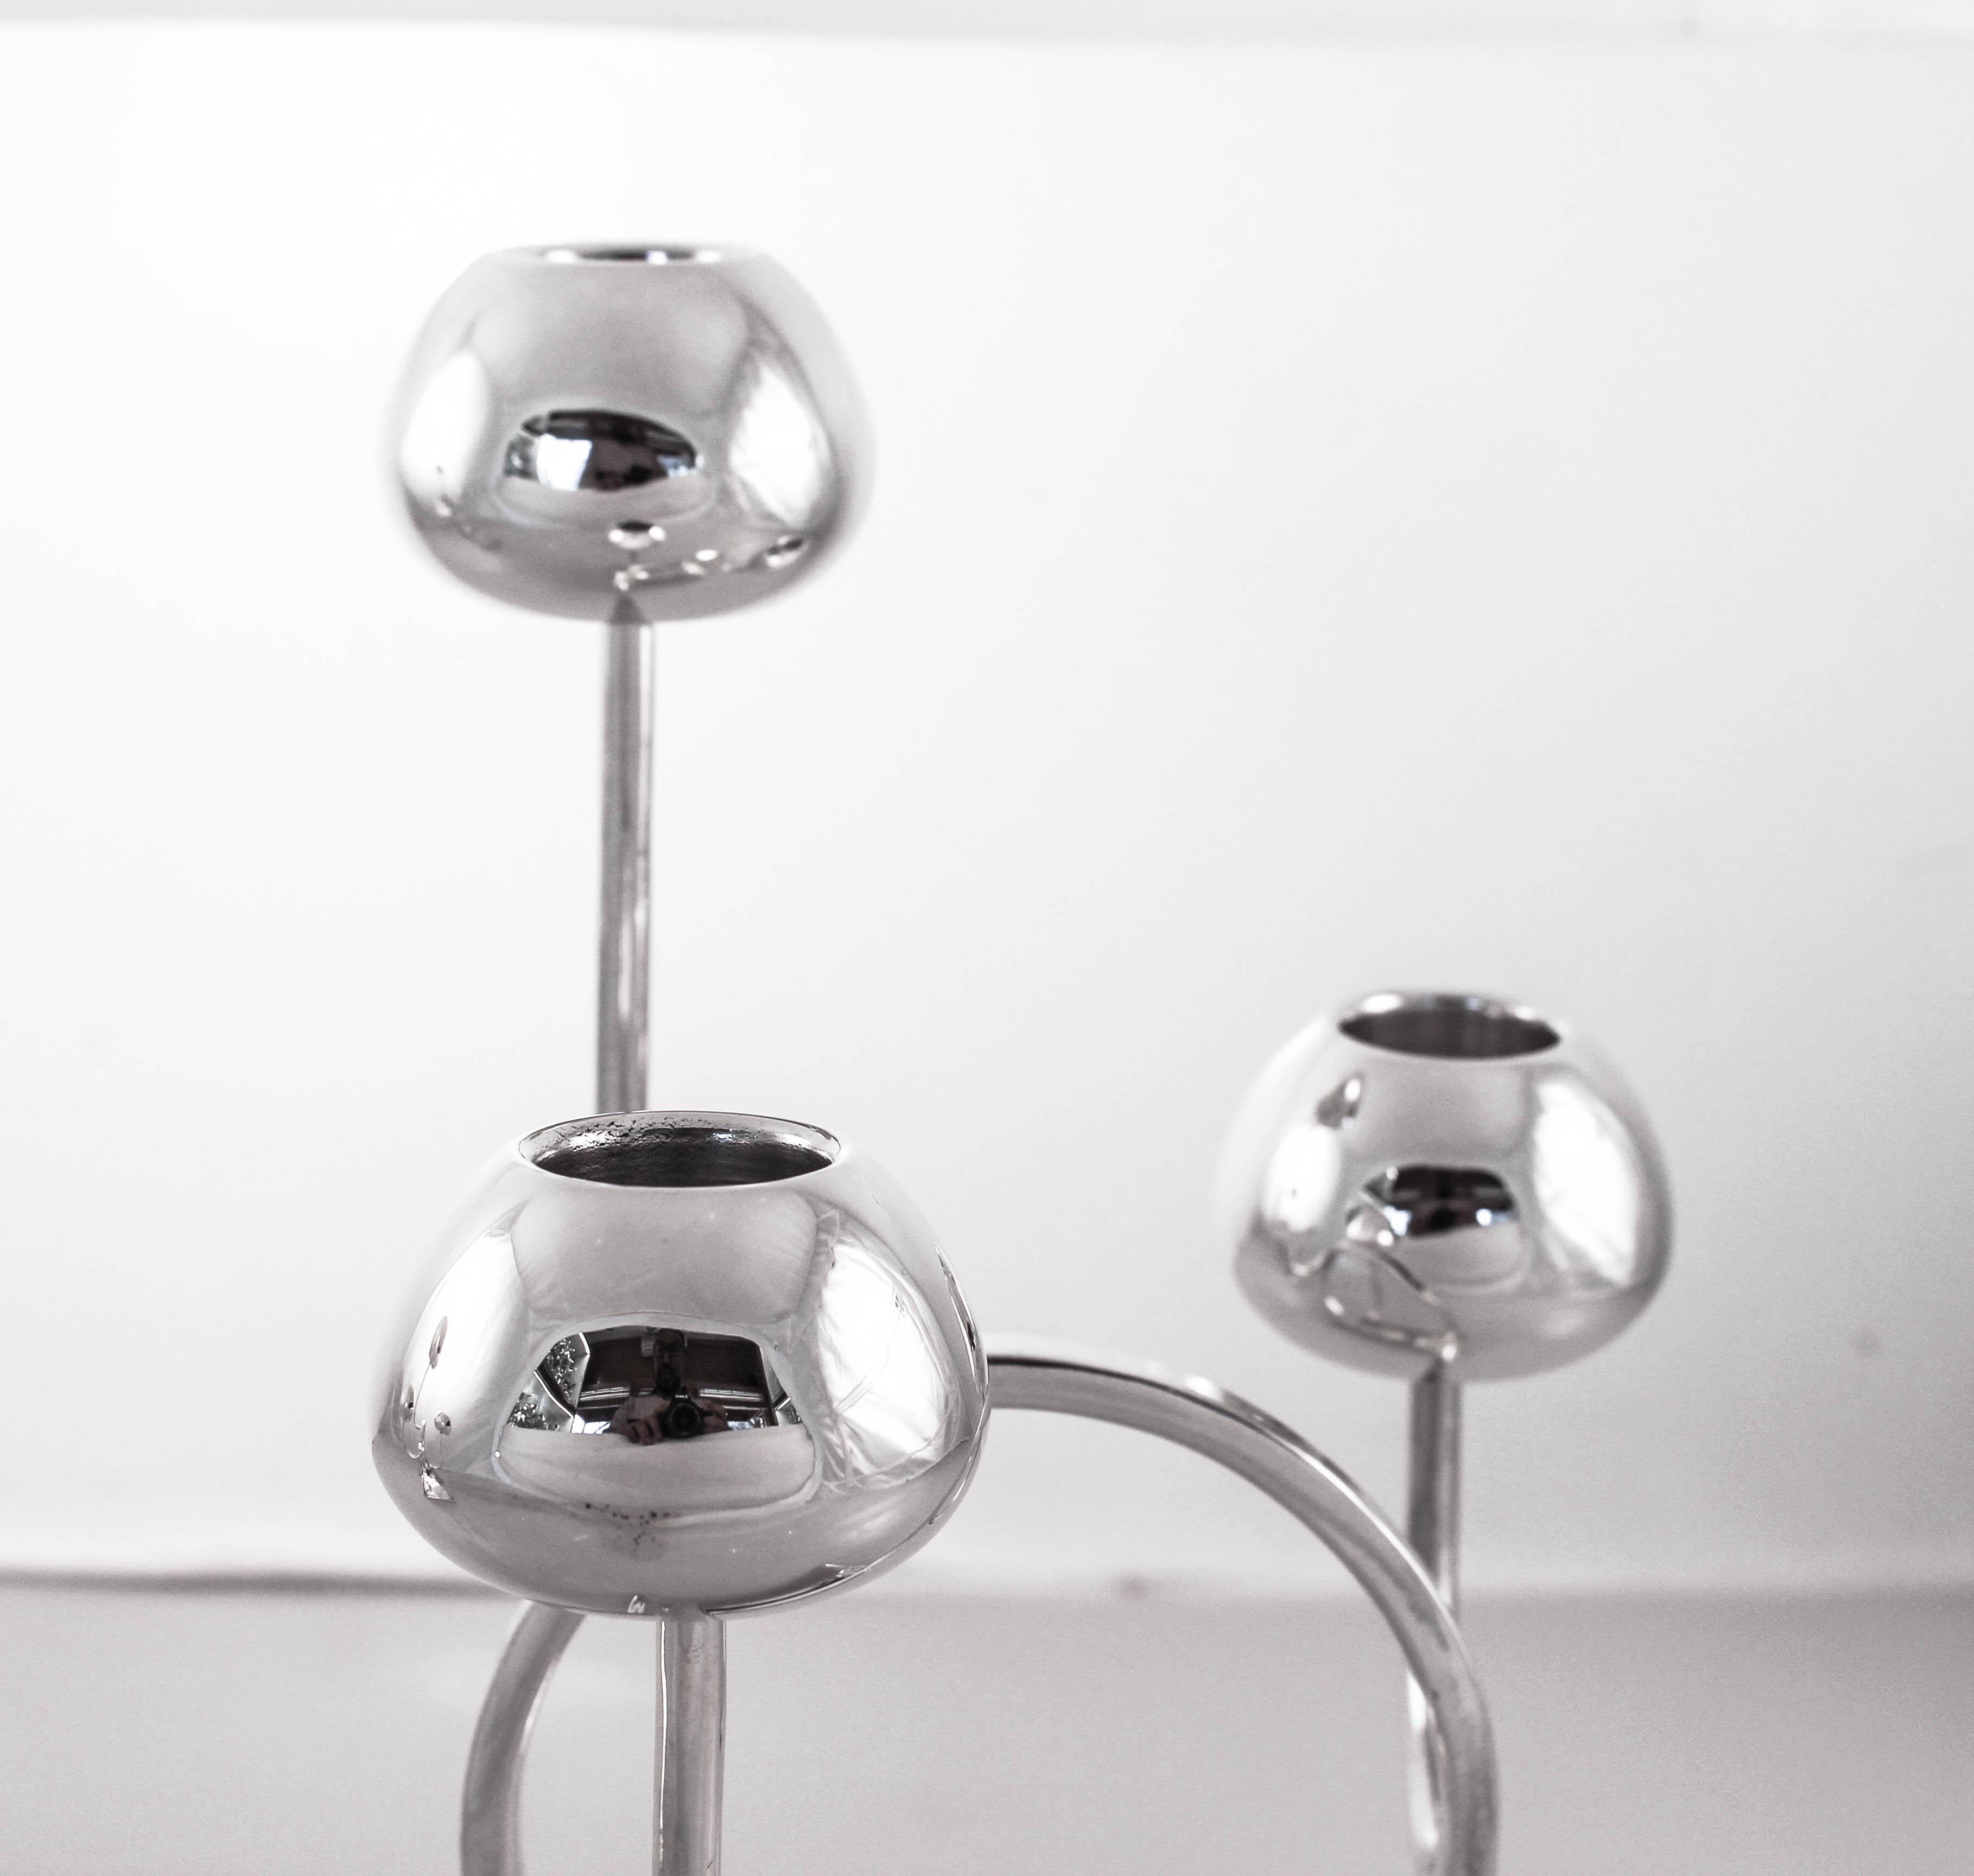 We are proud to offer this pair of three-branch sterling silver midcentury candelabras. They are uber-modern and futuristic. Different heights -10” and 7” and shapes— circular and square, make for an abstract decorative piece. They look like